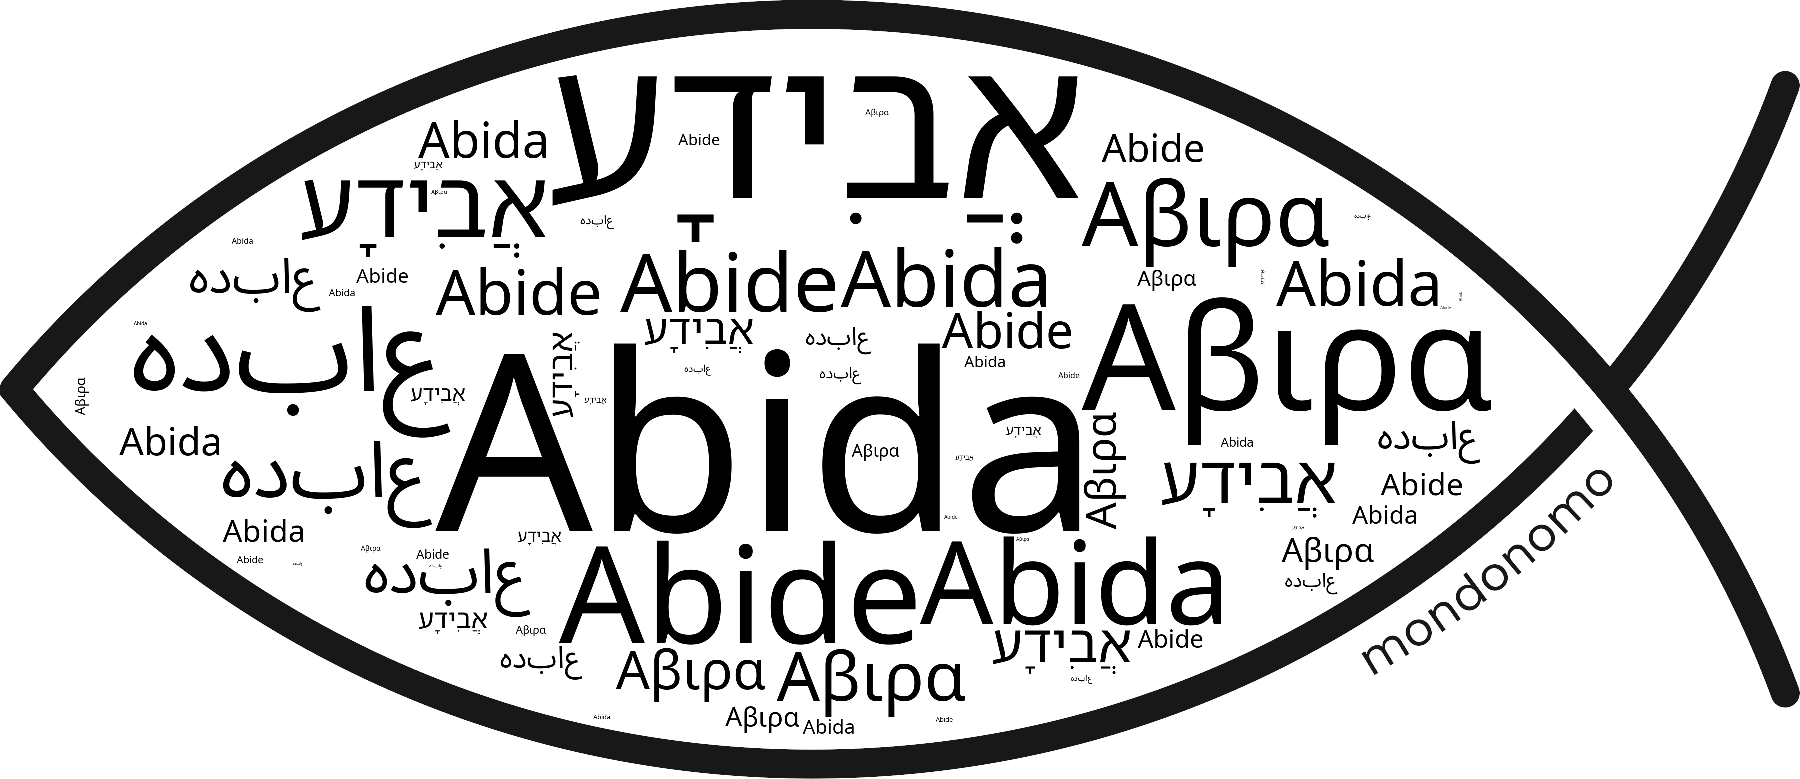 Name Abida in the world's Bibles